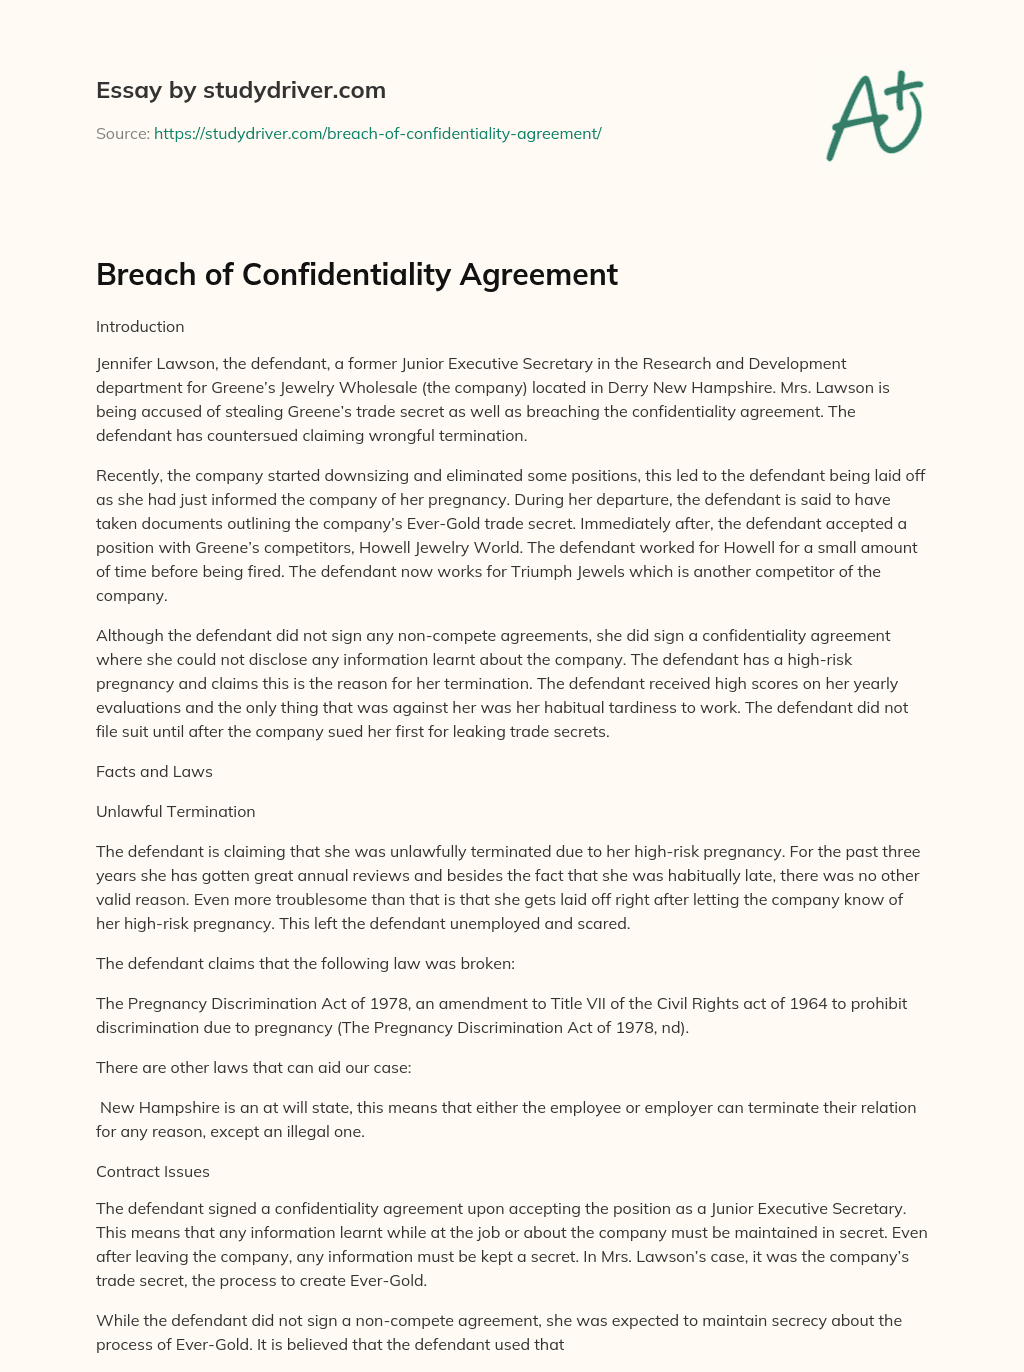 Breach of Confidentiality Agreement essay